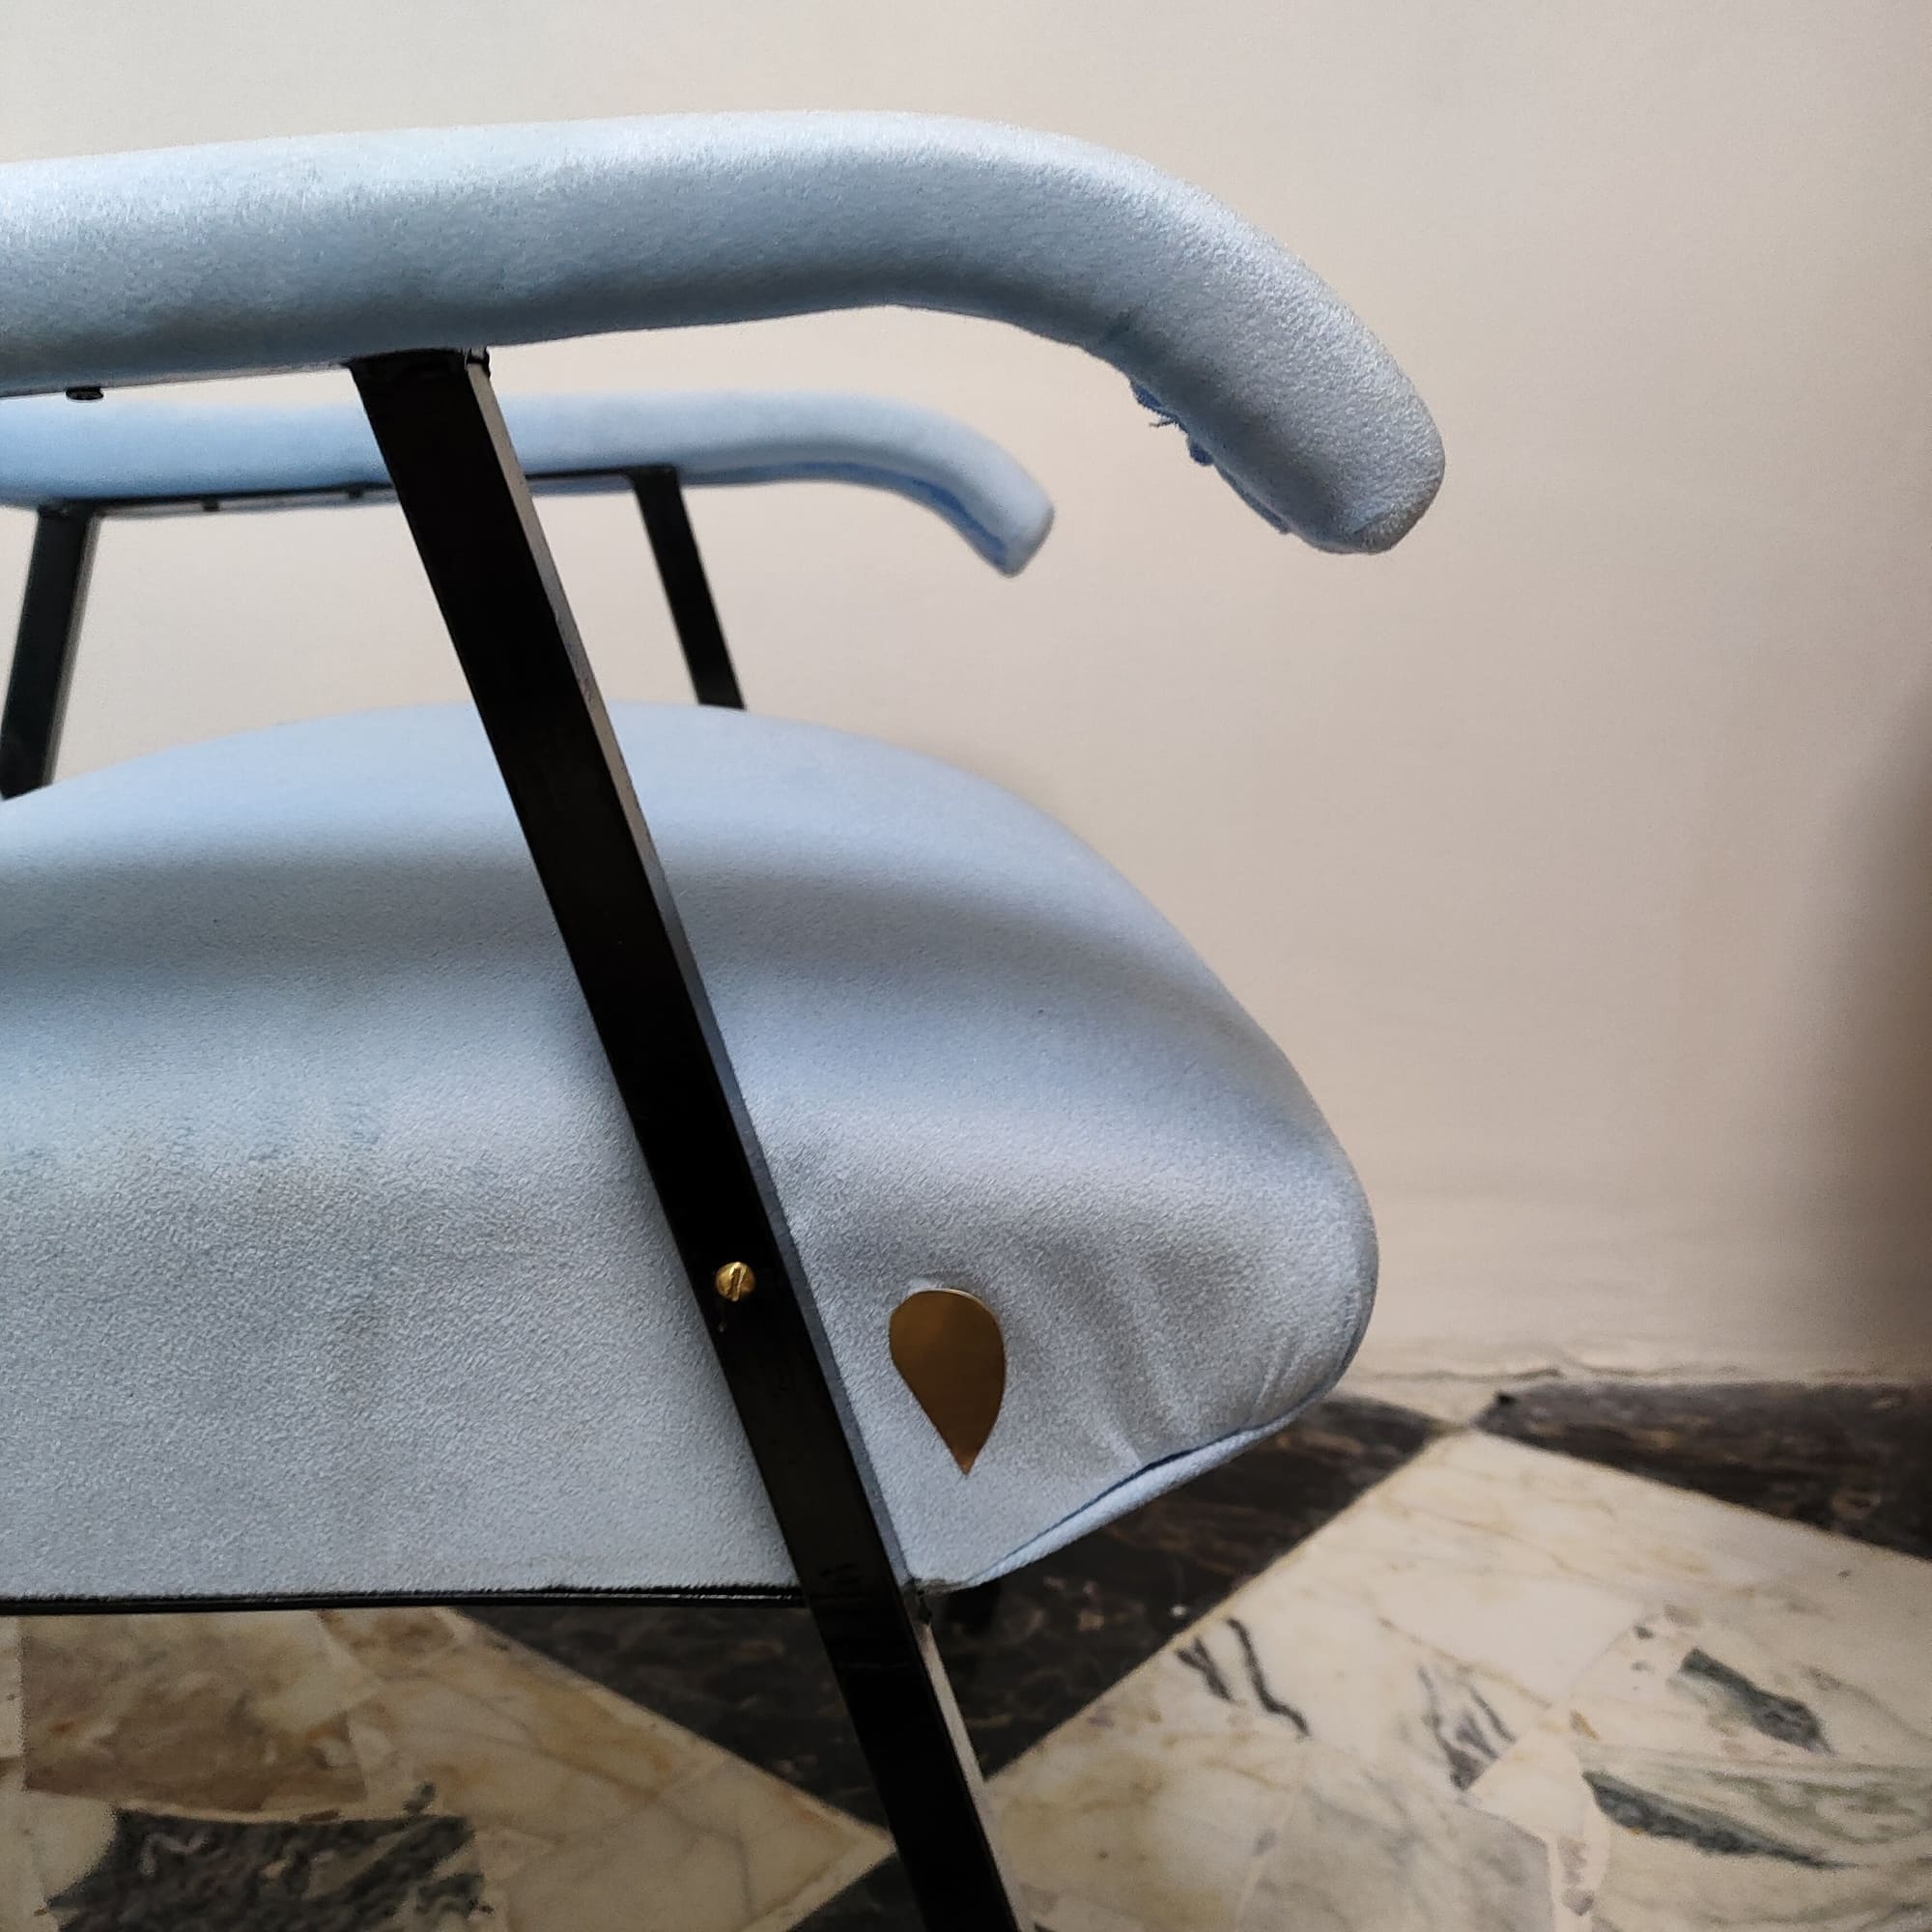 visionidepoca-pair-of-60s-70s-armchairs-upholstered-in blue-and-black-feet-with-brass-inserts-3